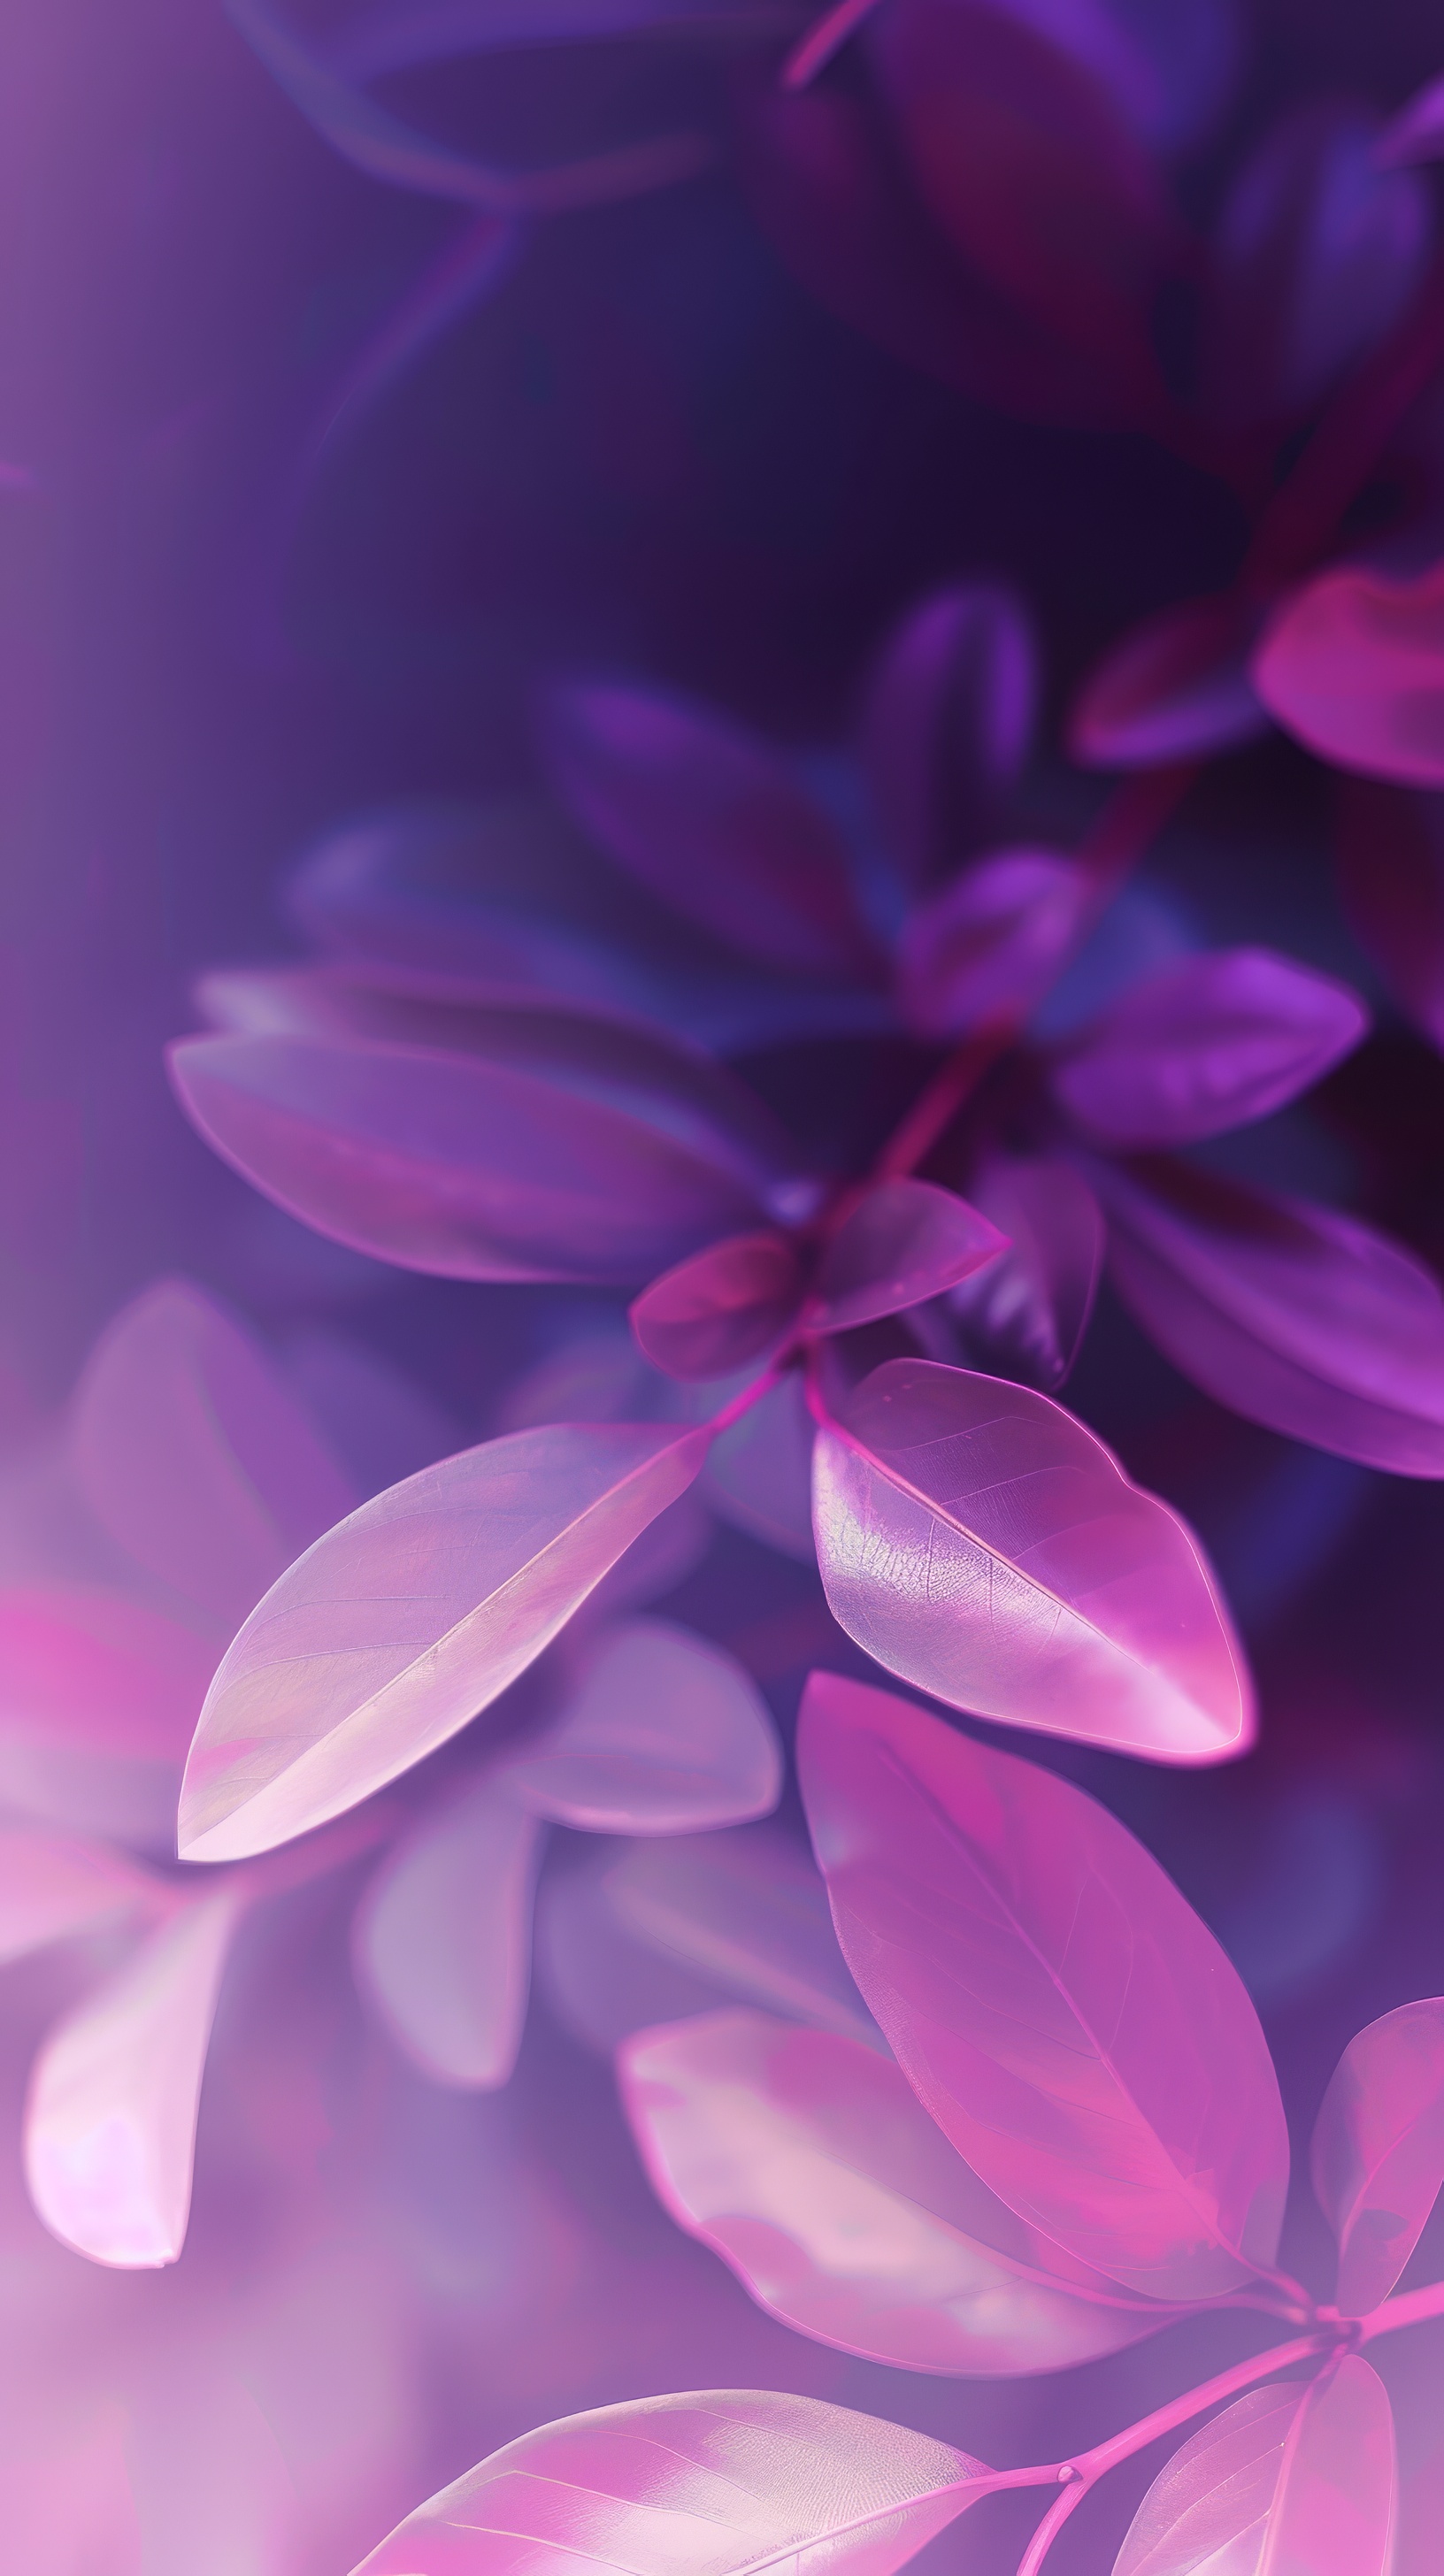 Abstract purple leafs